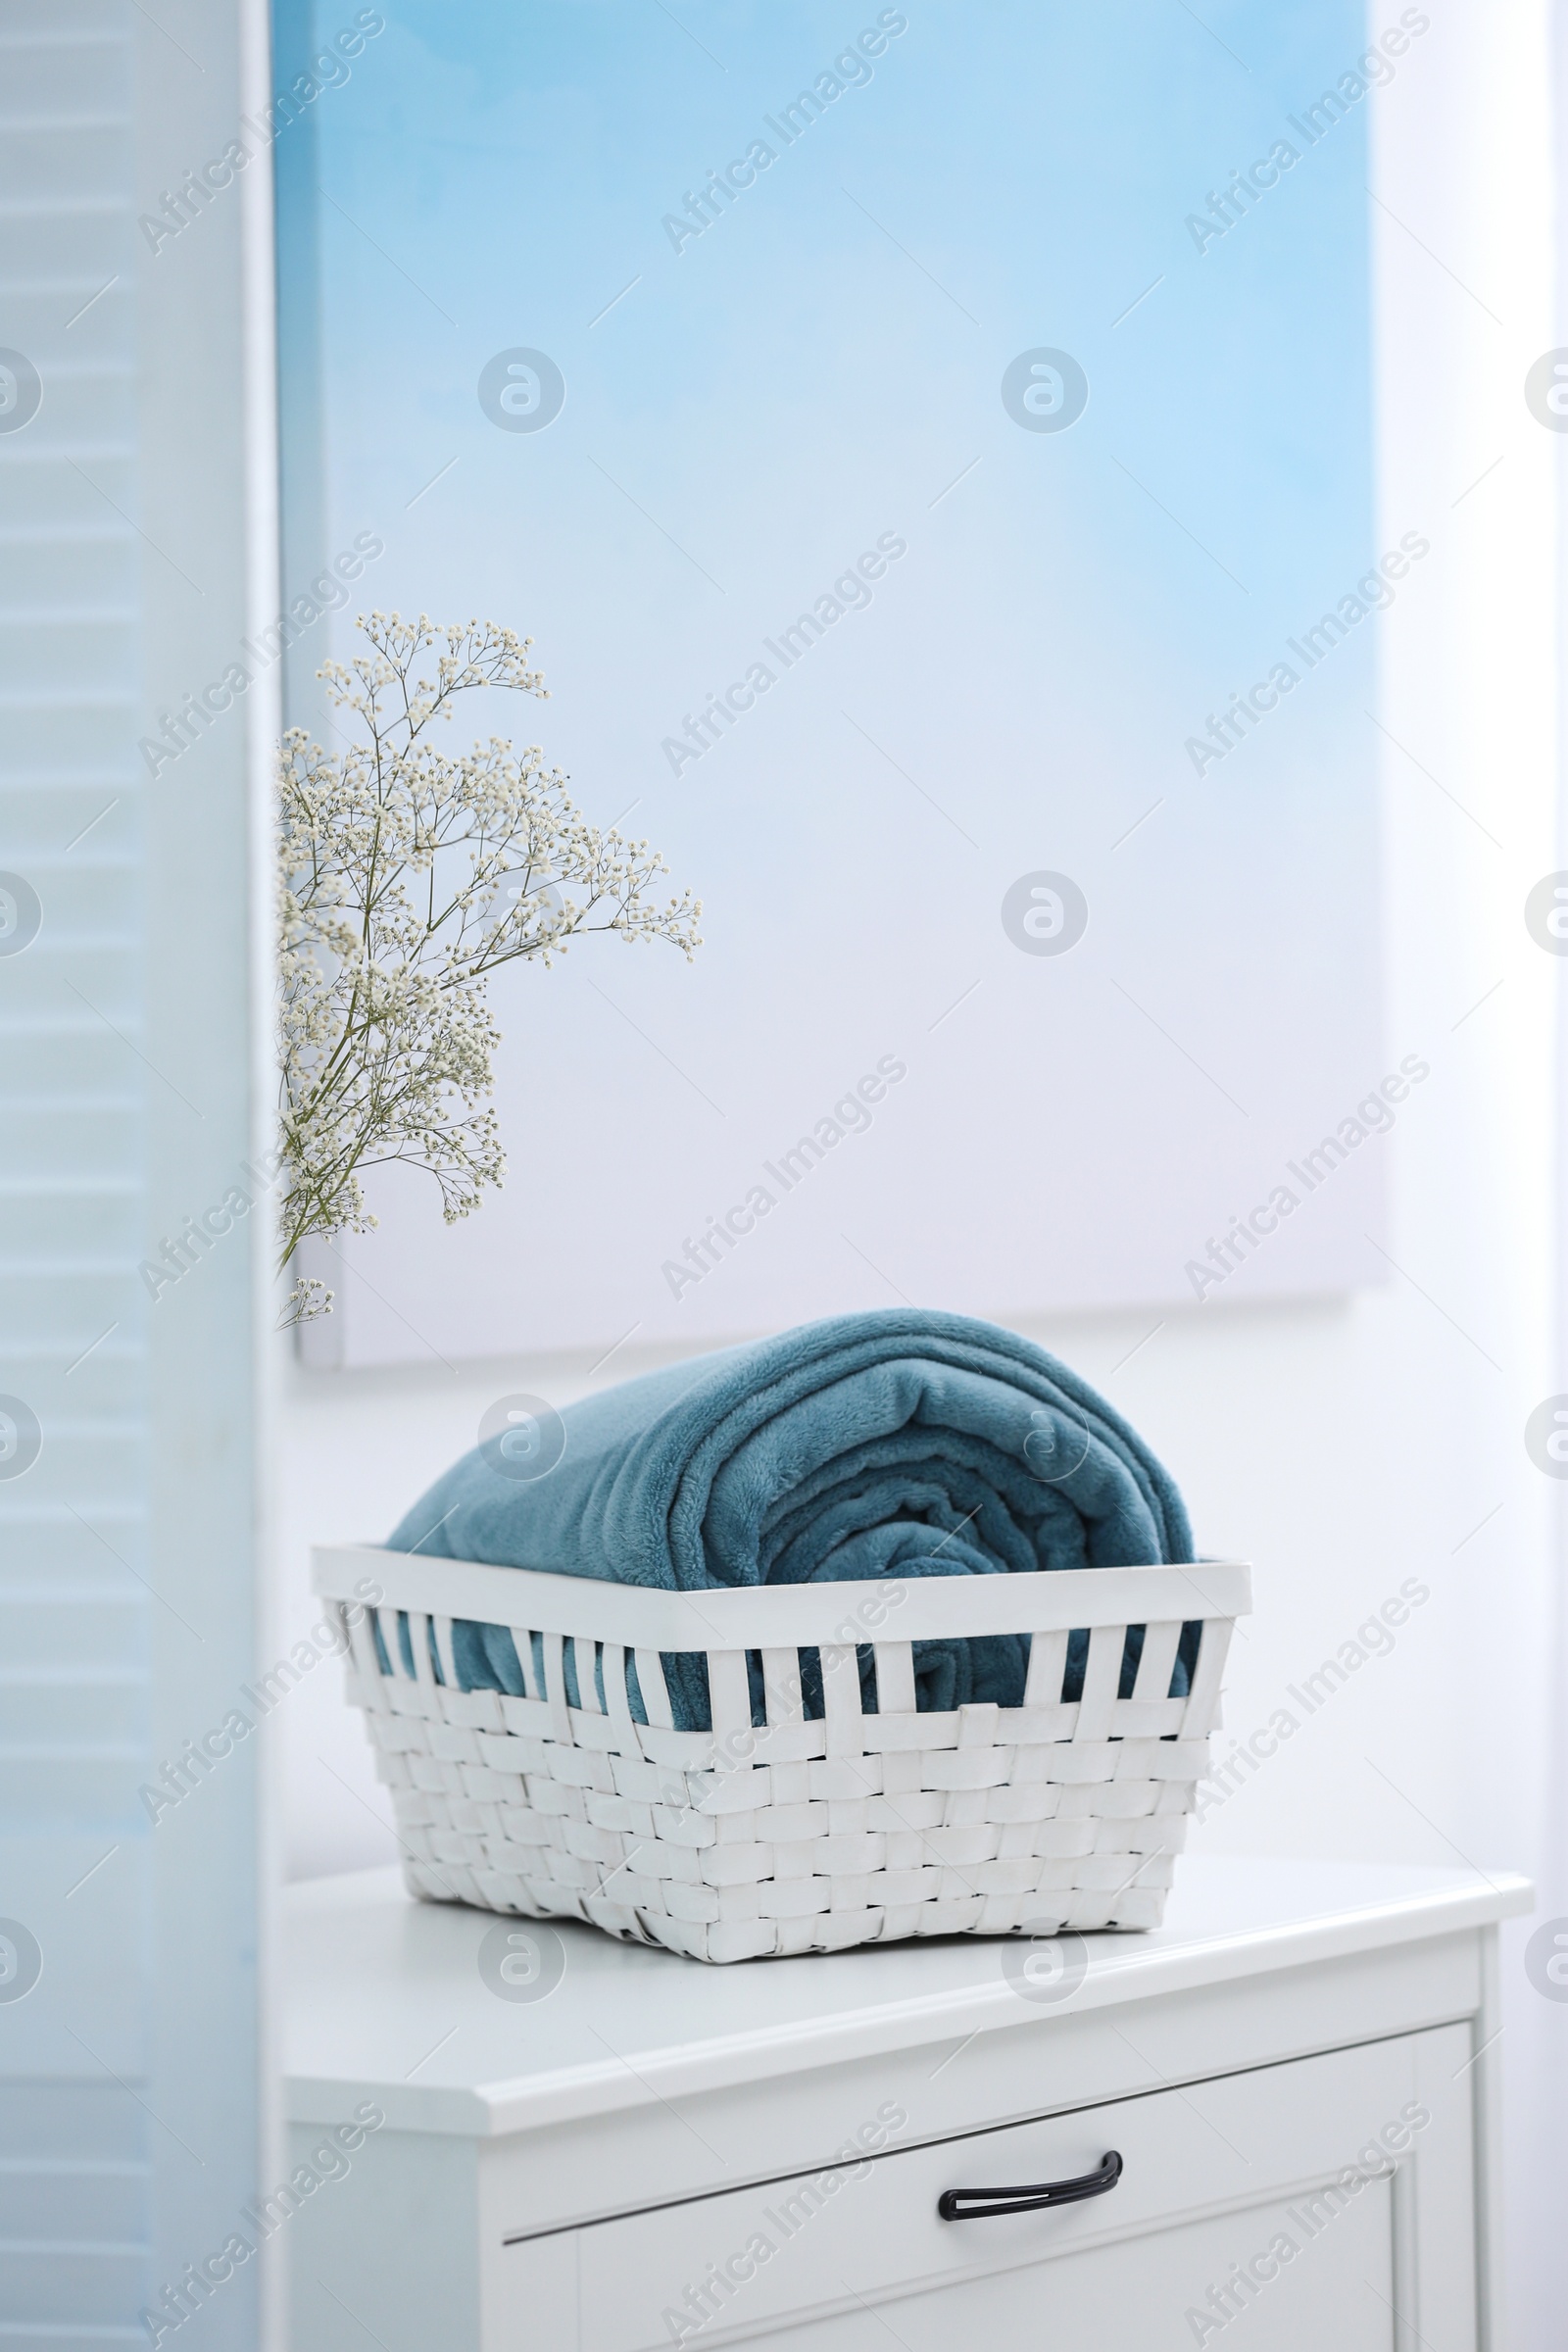 Photo of Basket with soft plaid on commode in room